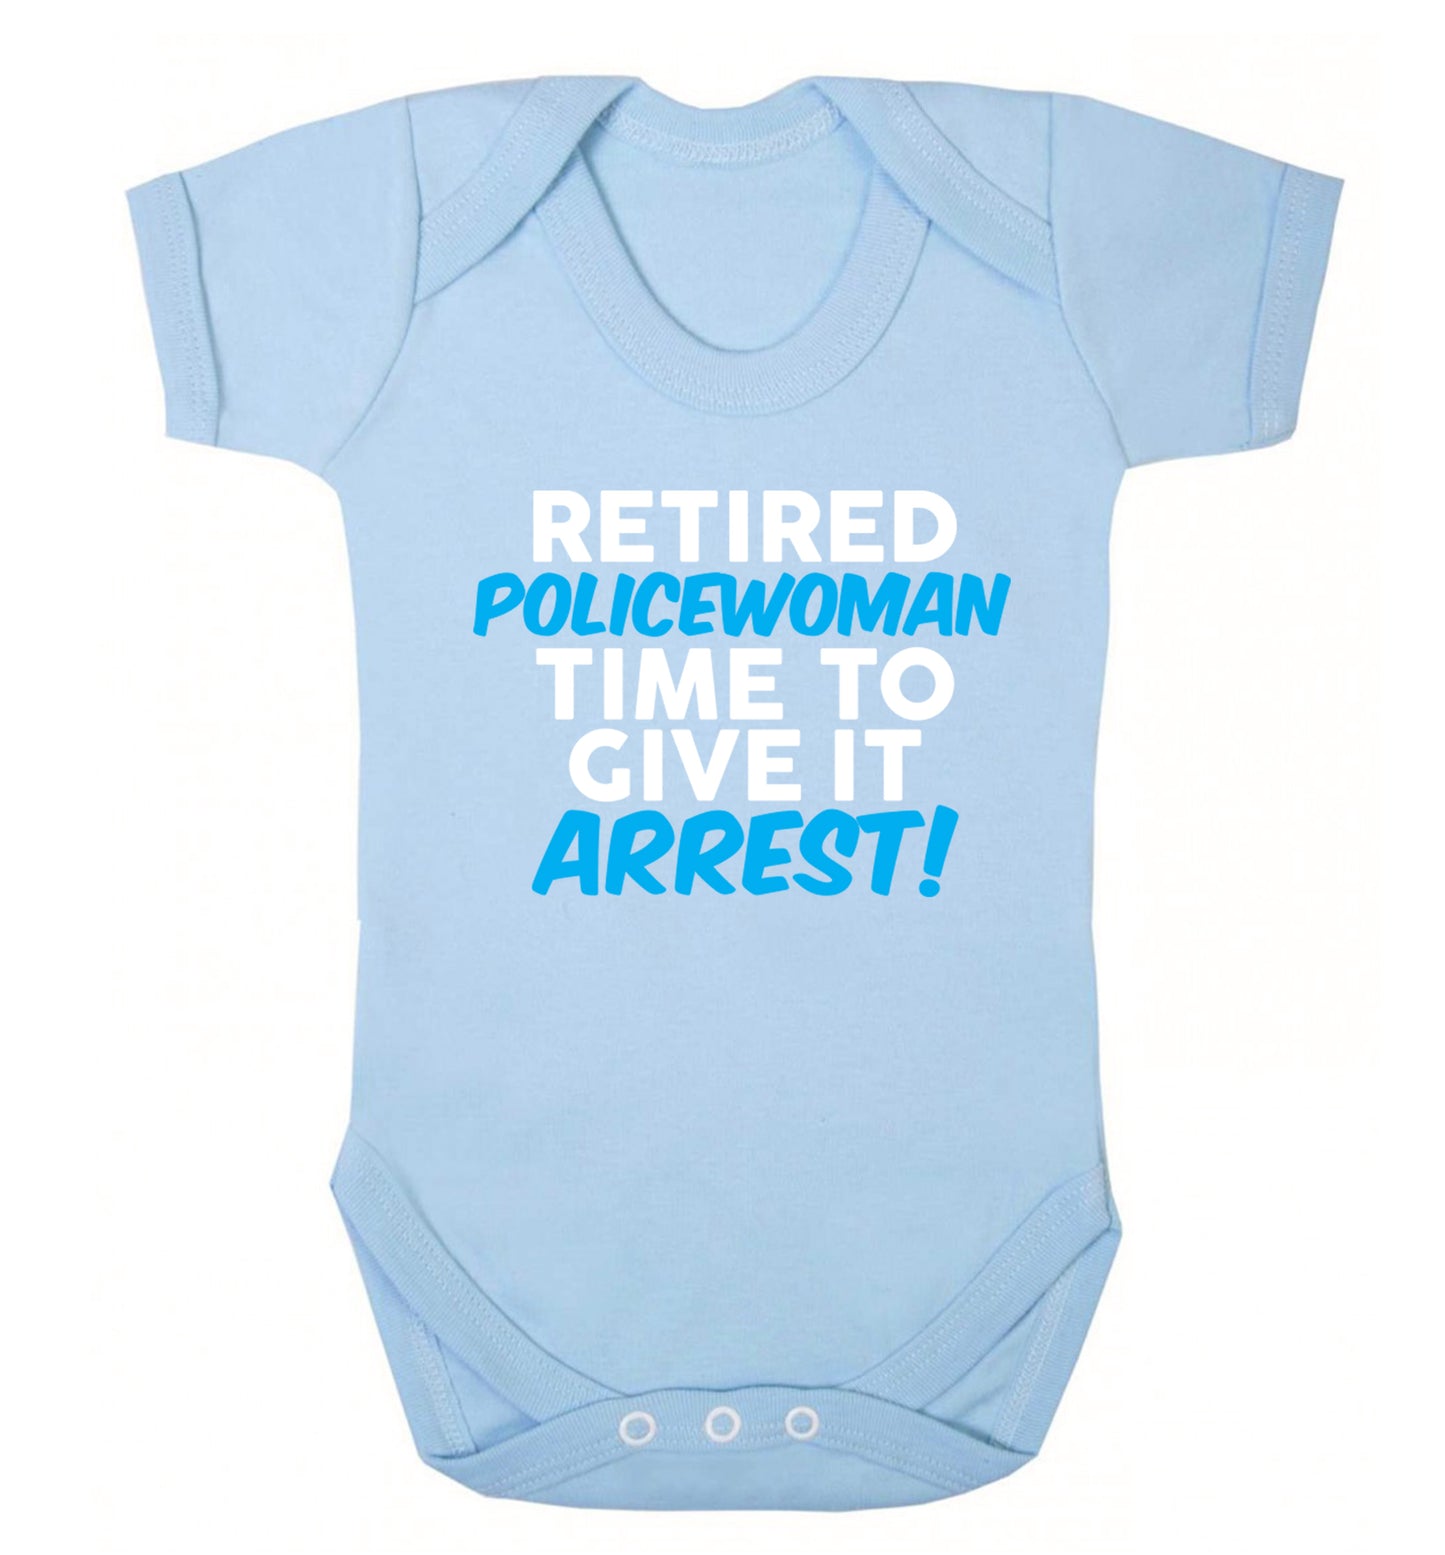 Retired policewoman time to give it arrest Baby Vest pale blue 18-24 months